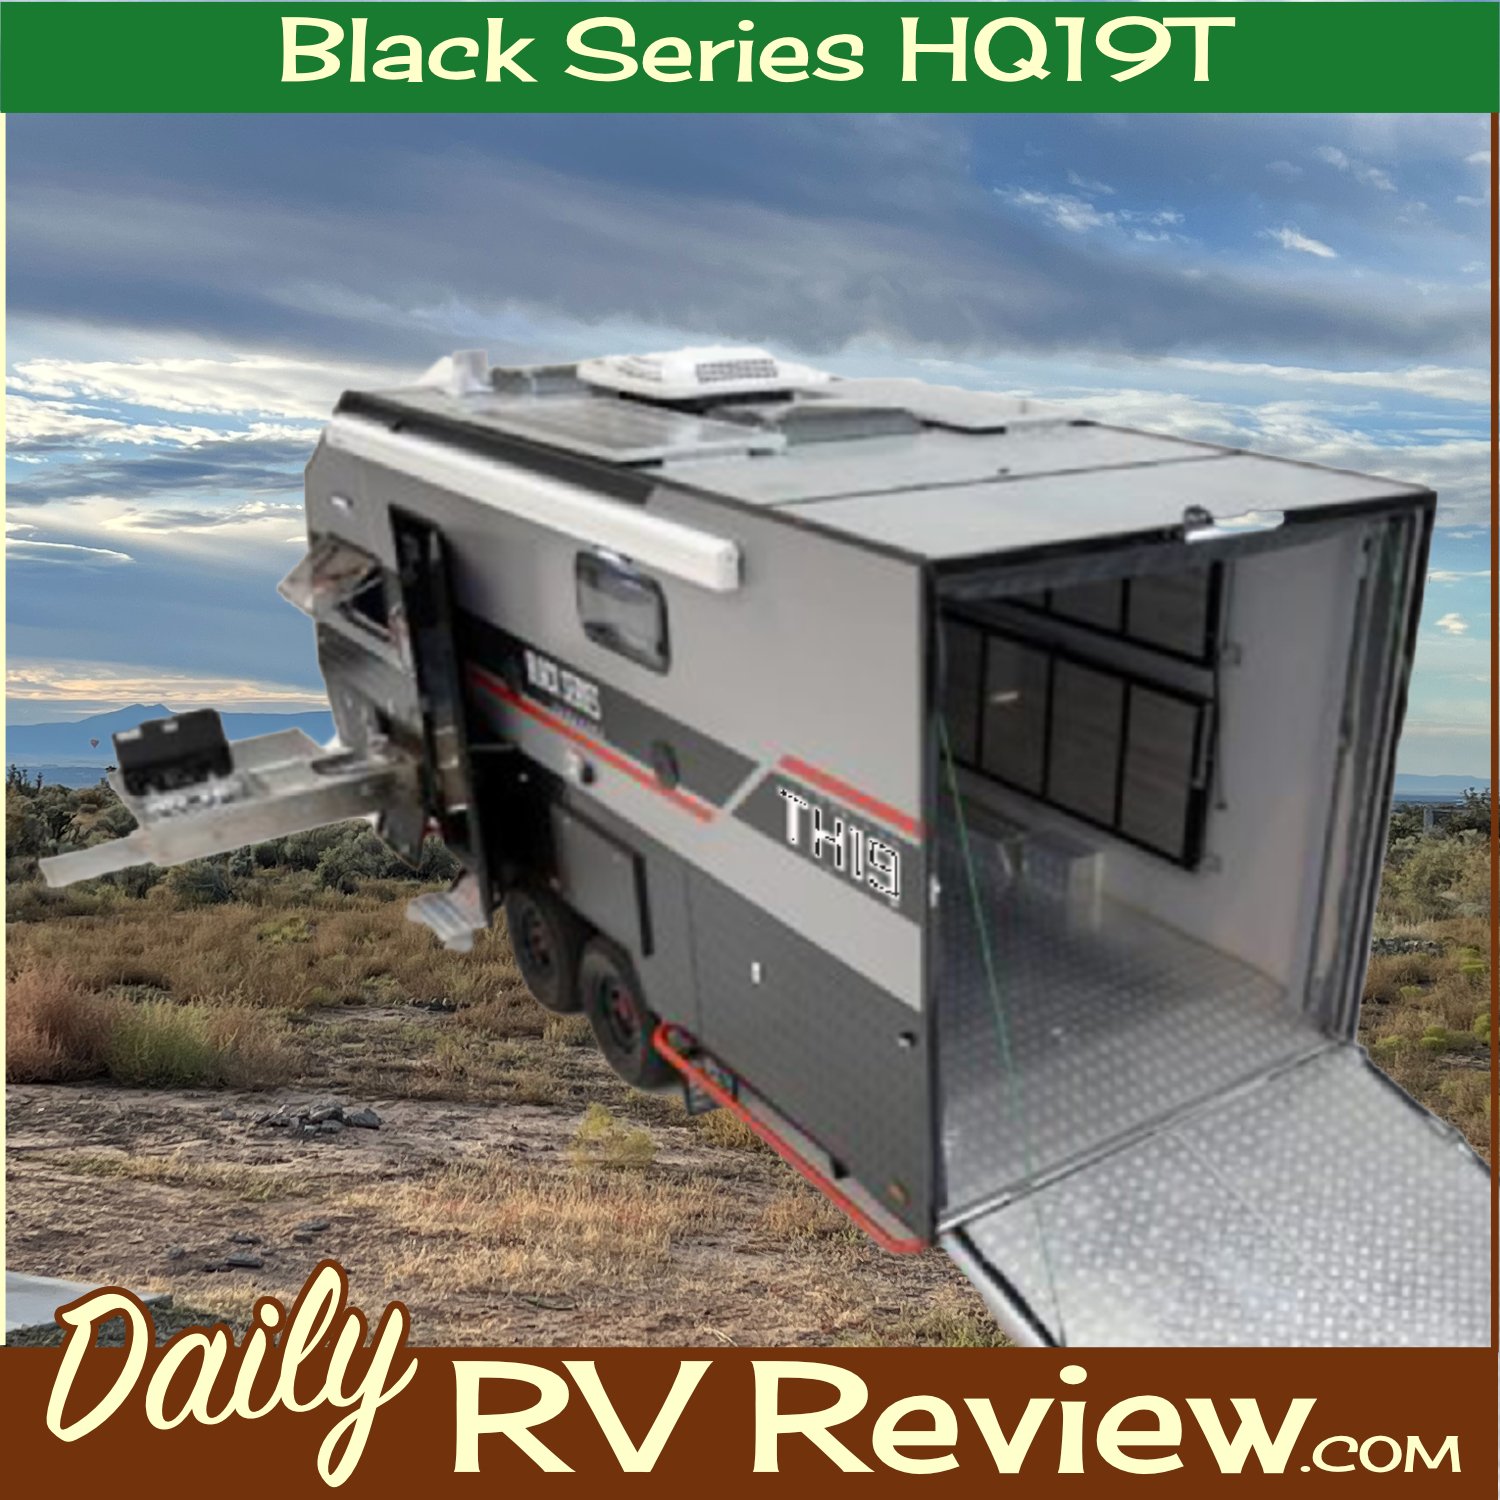 Full review of the 2023 Black Series HQ19T toy hauler